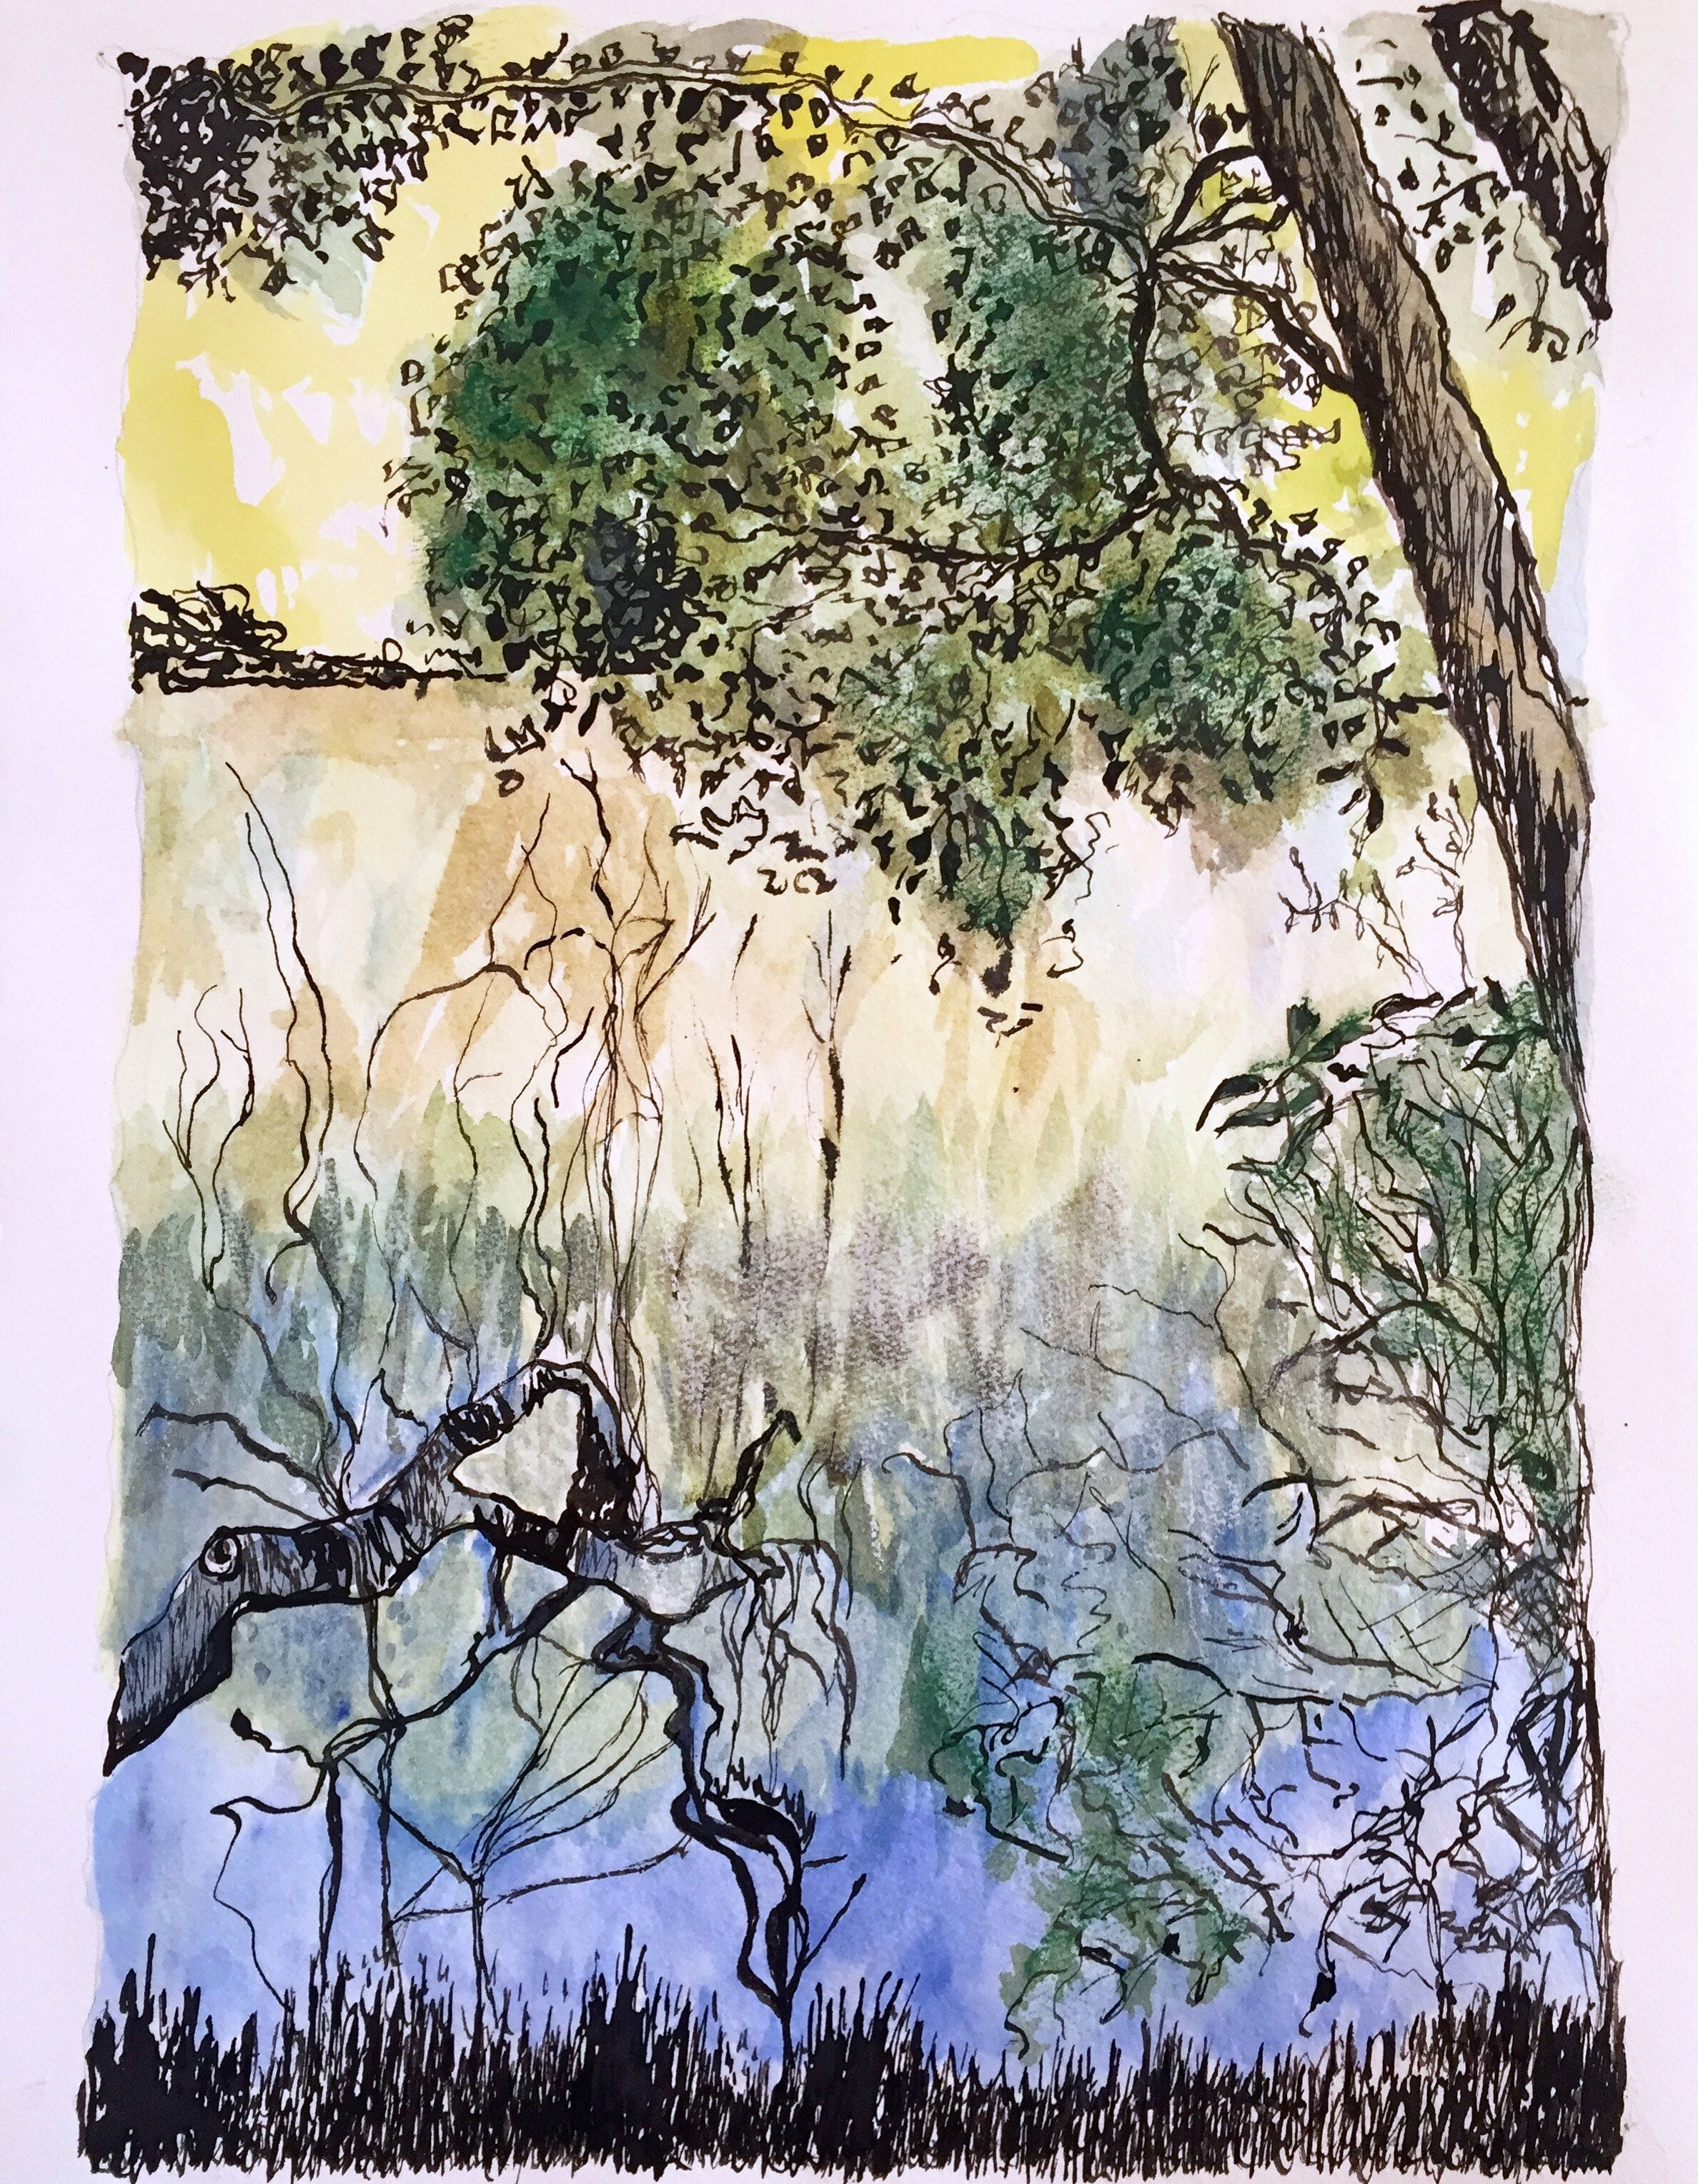  Mangrove. Ink, Watercolour and pasteljpg